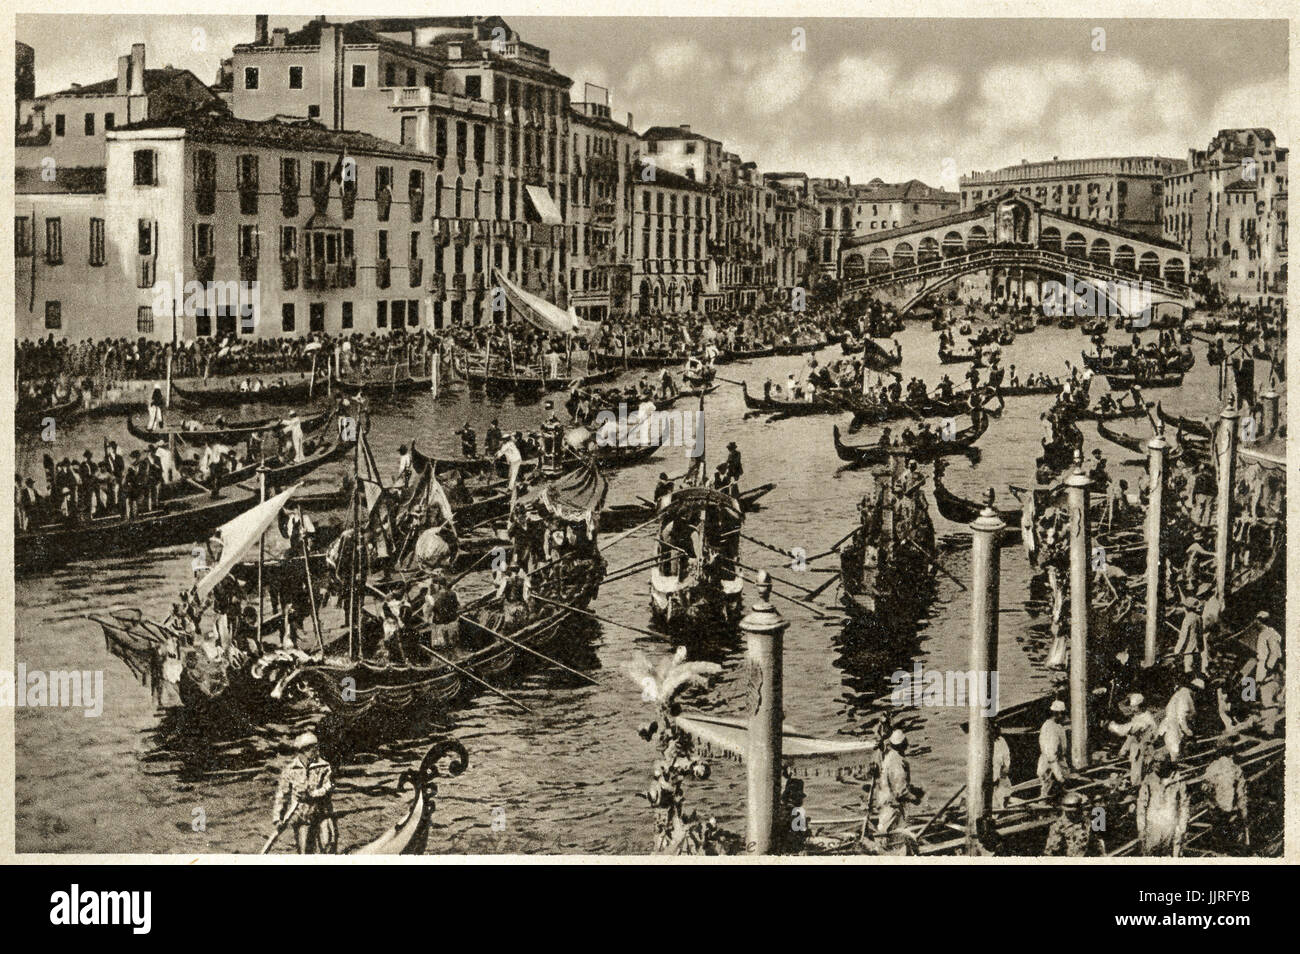 Vintage 1900's B&W image of Regata Storica a main event in the annual 'Voga alla Veneta' rowing calendar. This unique sport has been practised in the Venetian lagoon for thousands of years. A spectacular historical water pageant precedes the race. Scores of typically 16th century-style boats with gondoliers in period costume carry the Doge, the Doge's wife and all the highest ranking Venetian officials up the Grand Canal in a historic parade. Rialto Bridge Venice Stock Photo